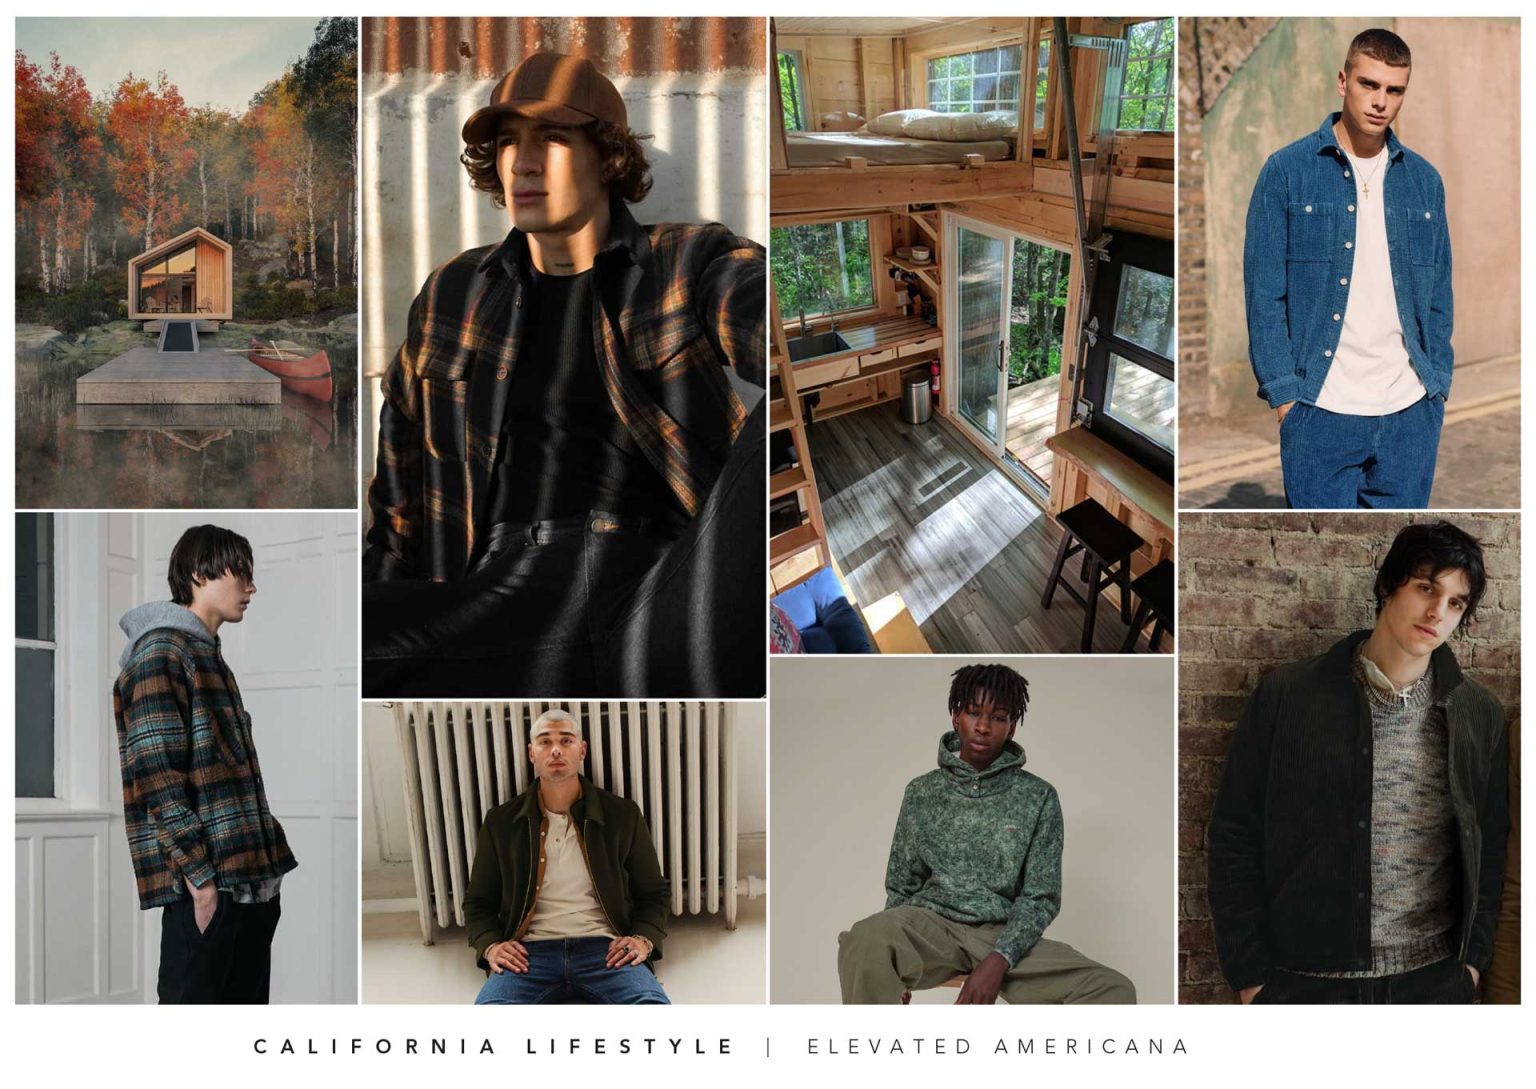 A mood board for a casual wear line for men